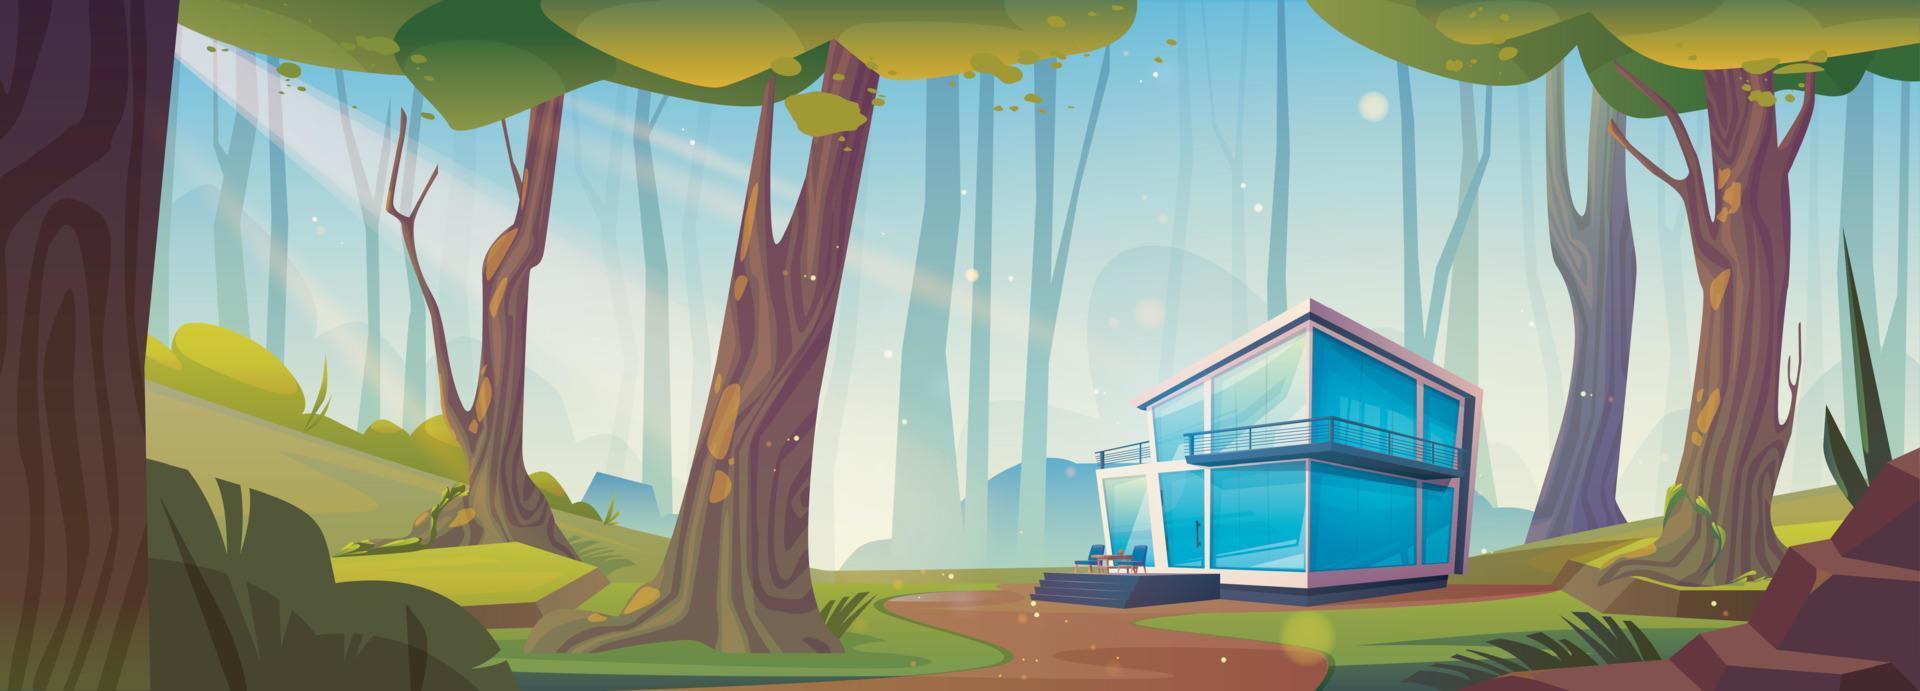 Glass house in woodland, forest cartoon landscape vector